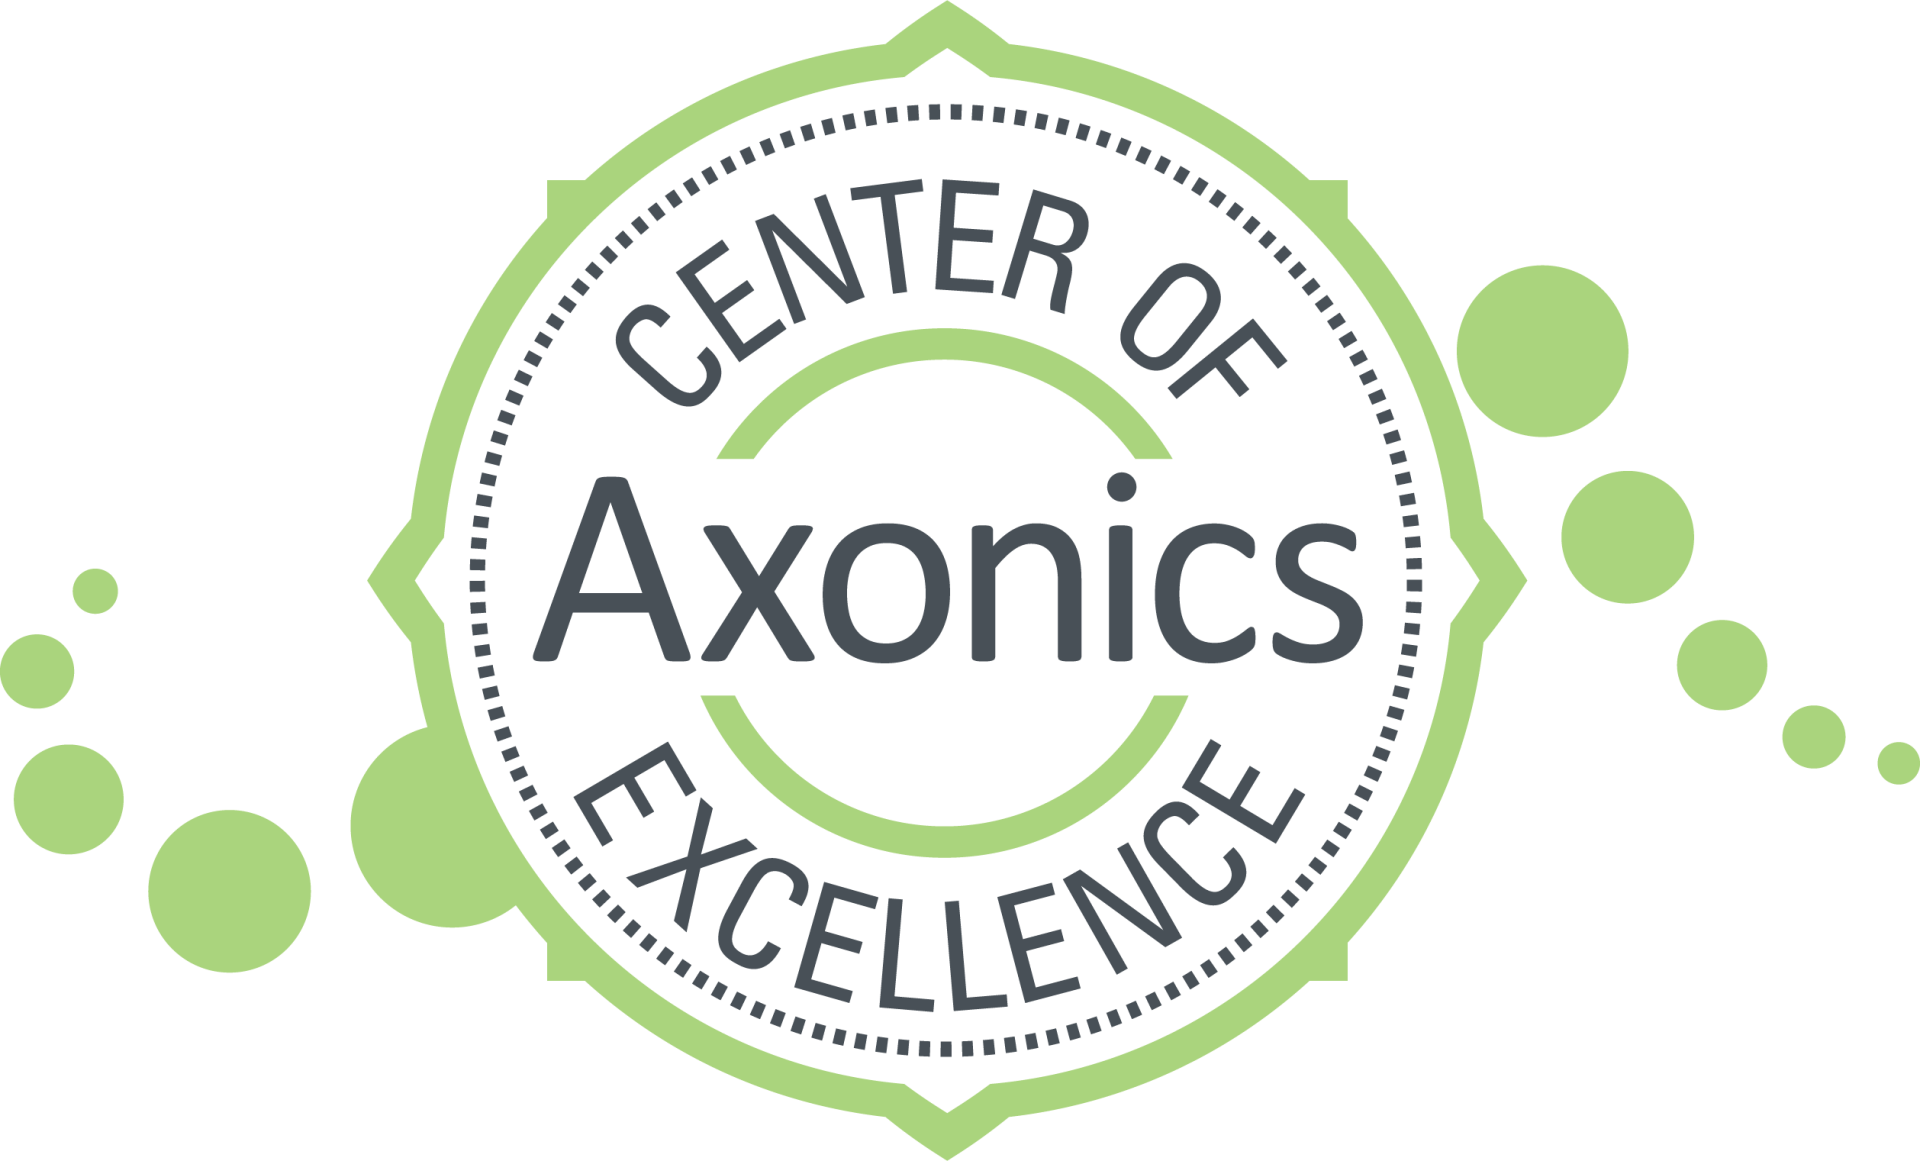 Center or Axonics Excellence